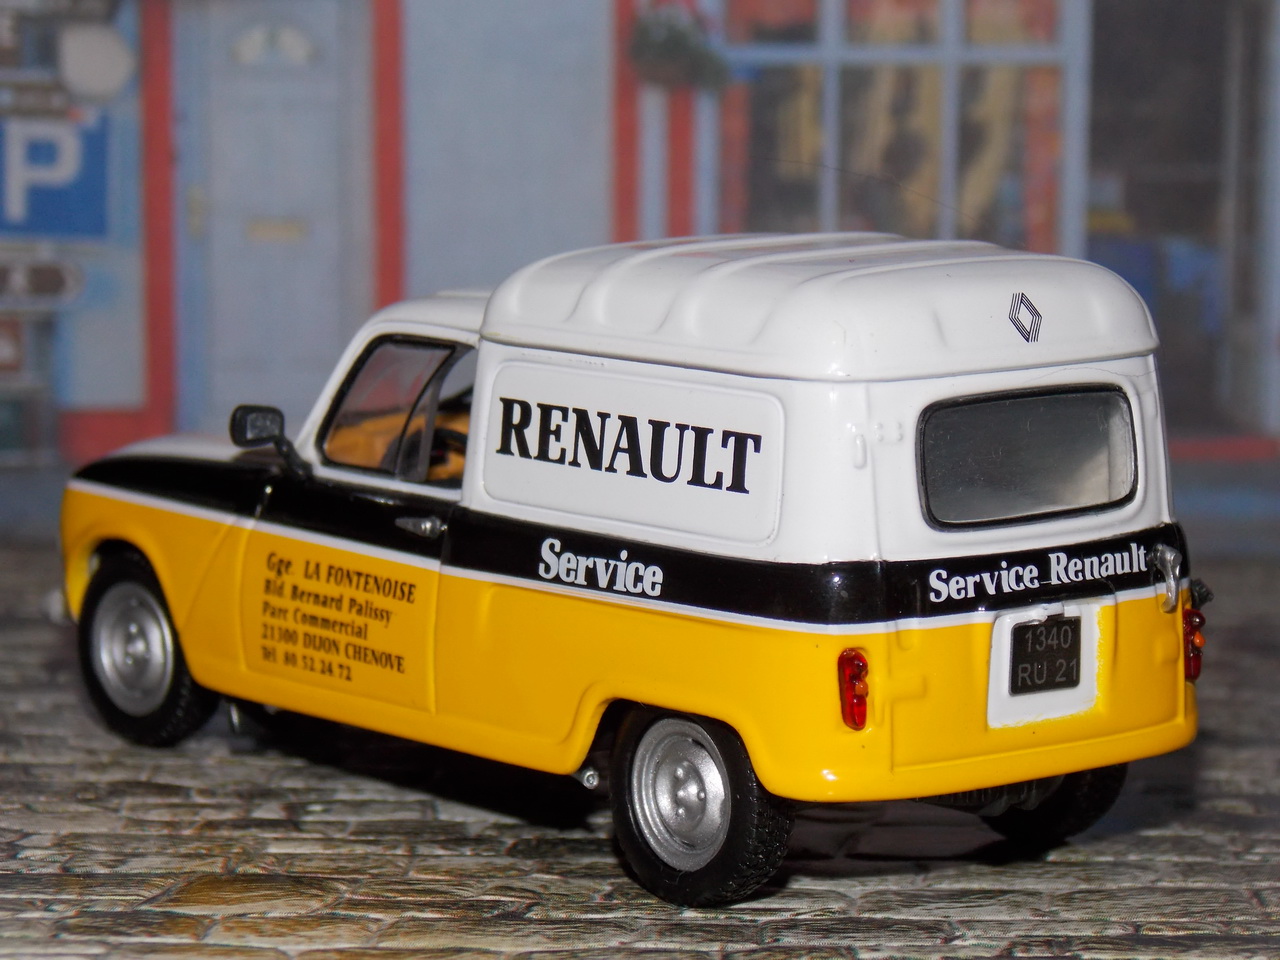 Renault 4 Fourgonnette F4 – 1981 – Service Renault